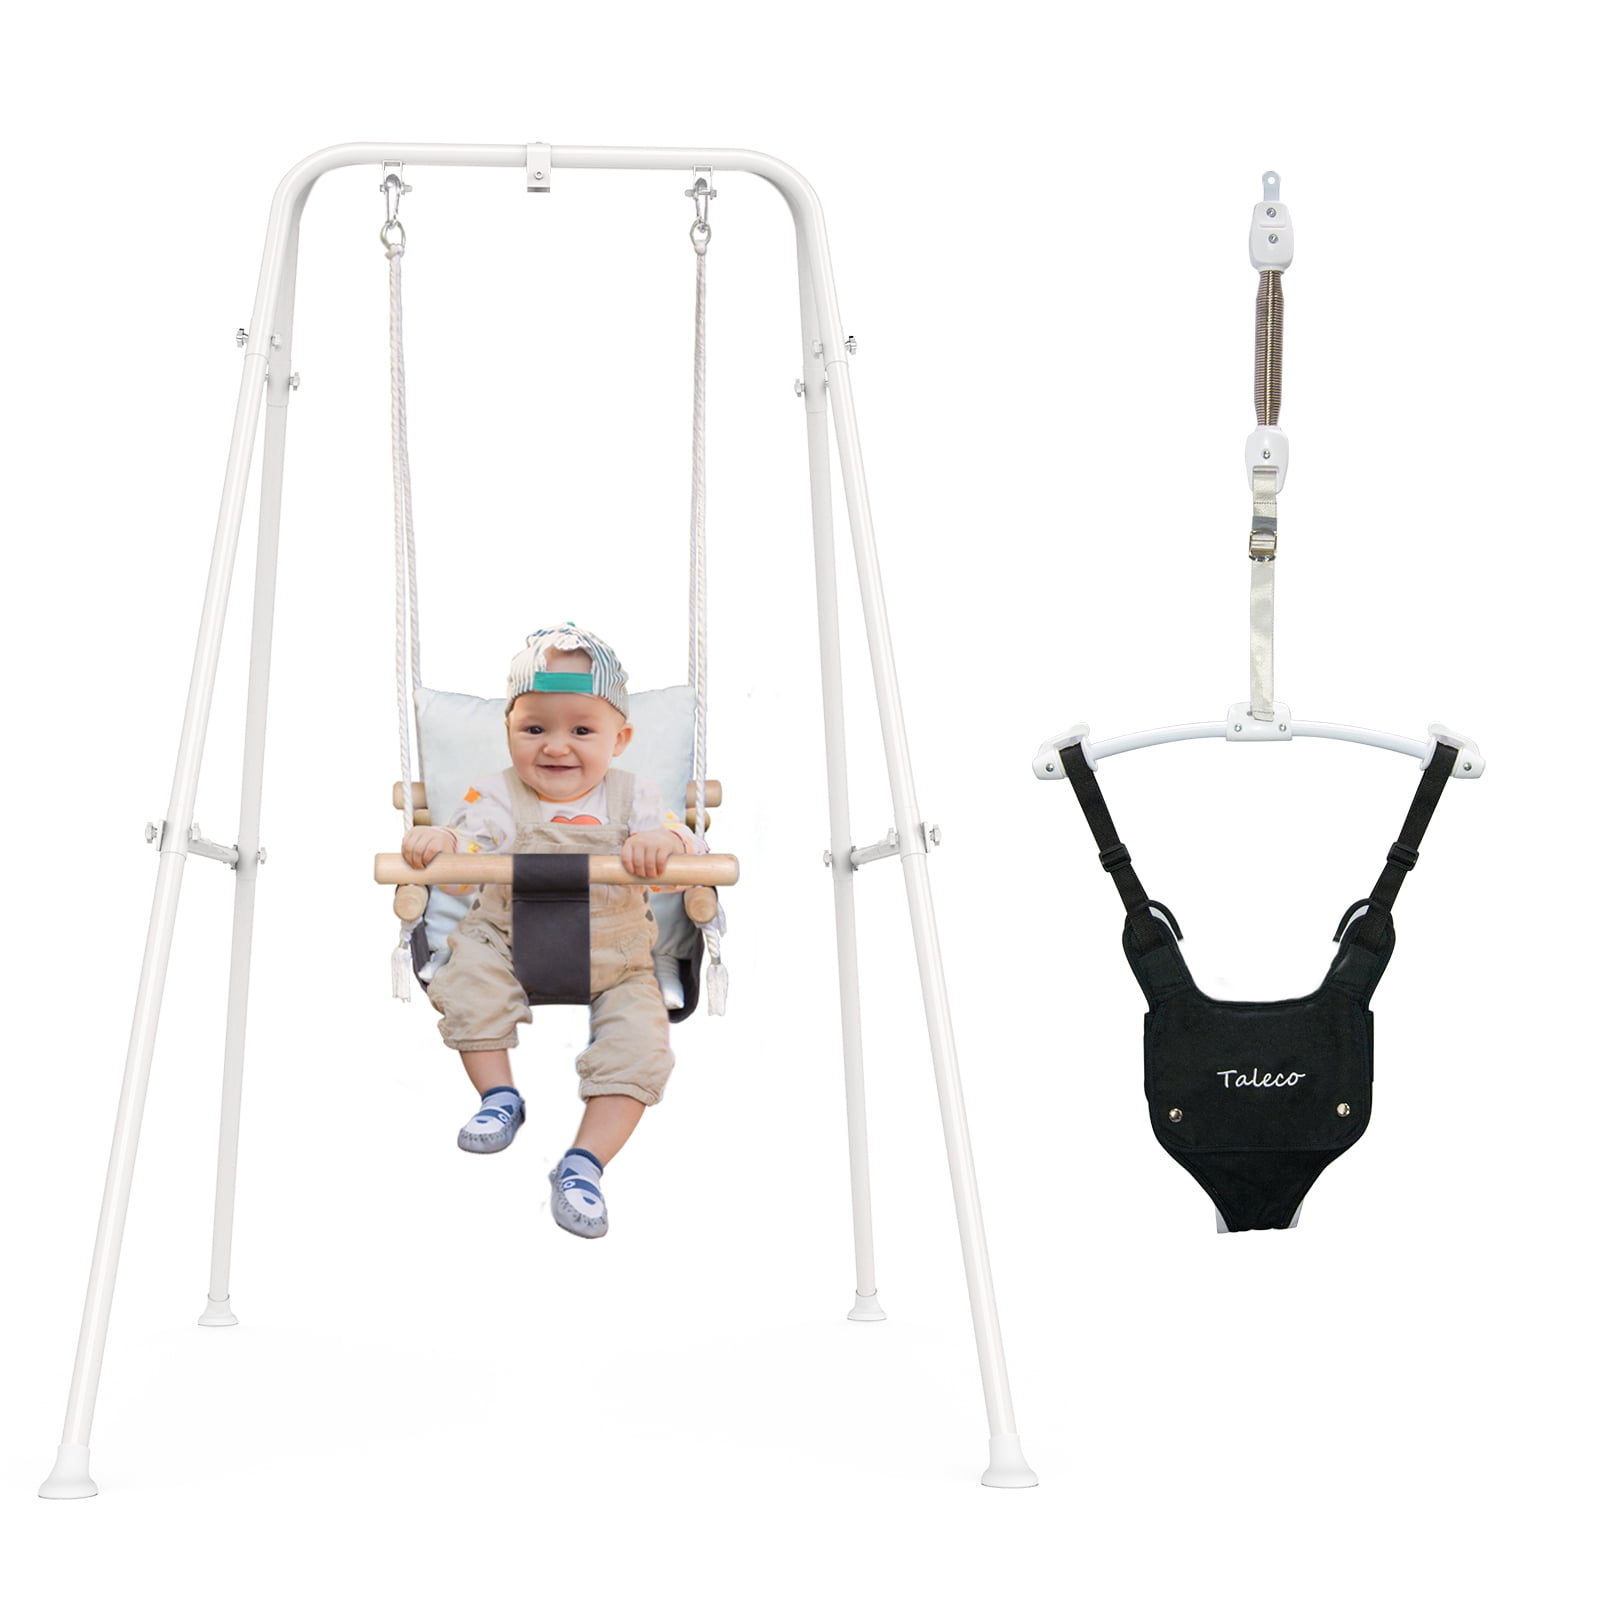 hdee Baby Door Jumper Durable Portable Door Swing Jumper 100 Kids Safety for Toddlers 6 Months to 2 Years Adjustable Baby Bouncer Fun Swing Jump Seat 